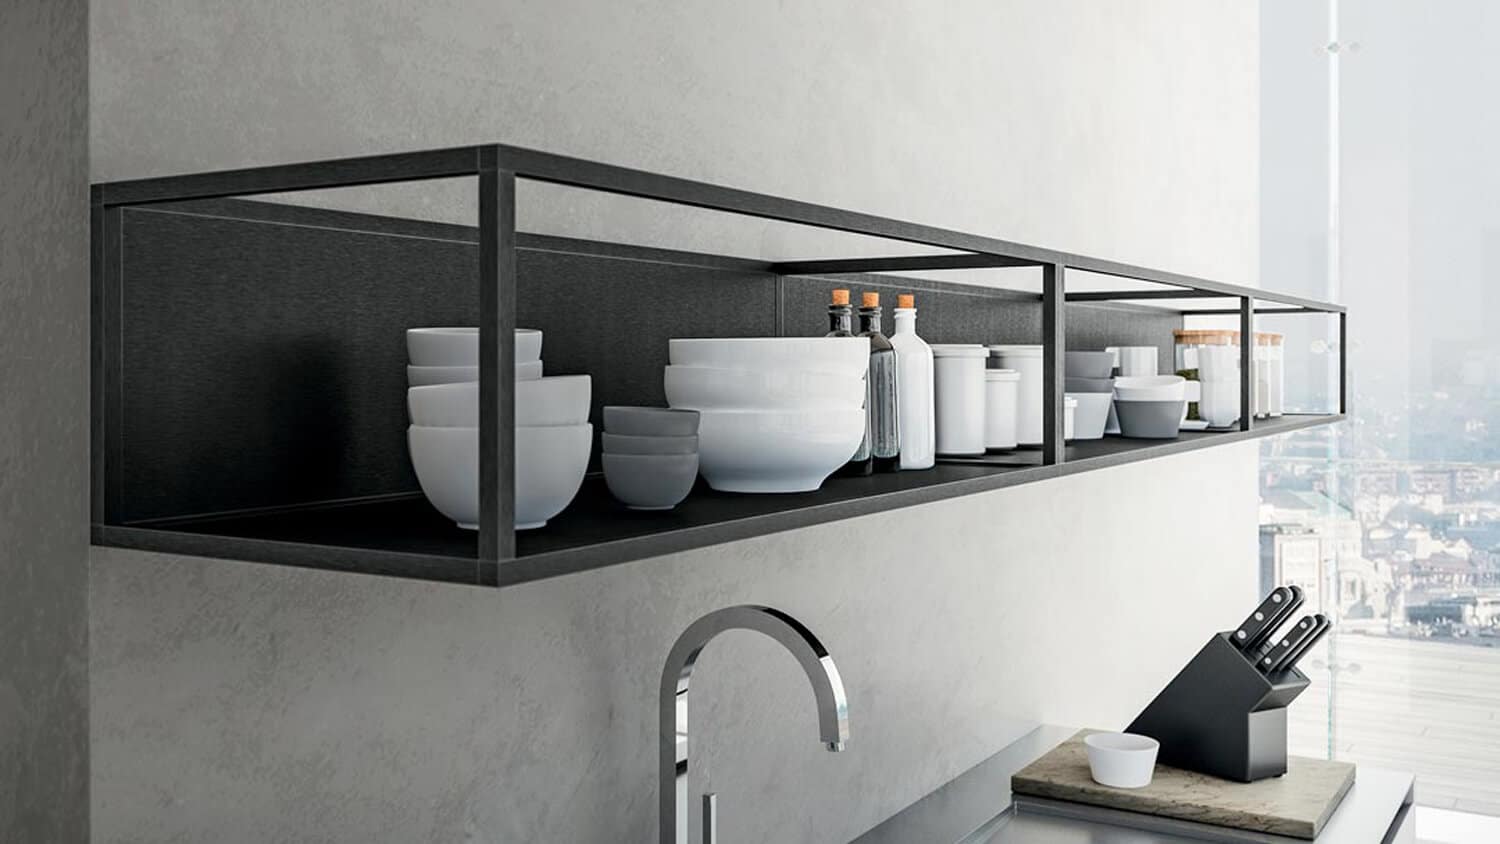 The Size open units in Graphite Black anodized aluminum consist of a base, a back panel and shelves. Combine individual units on the wall to create a unique composition.